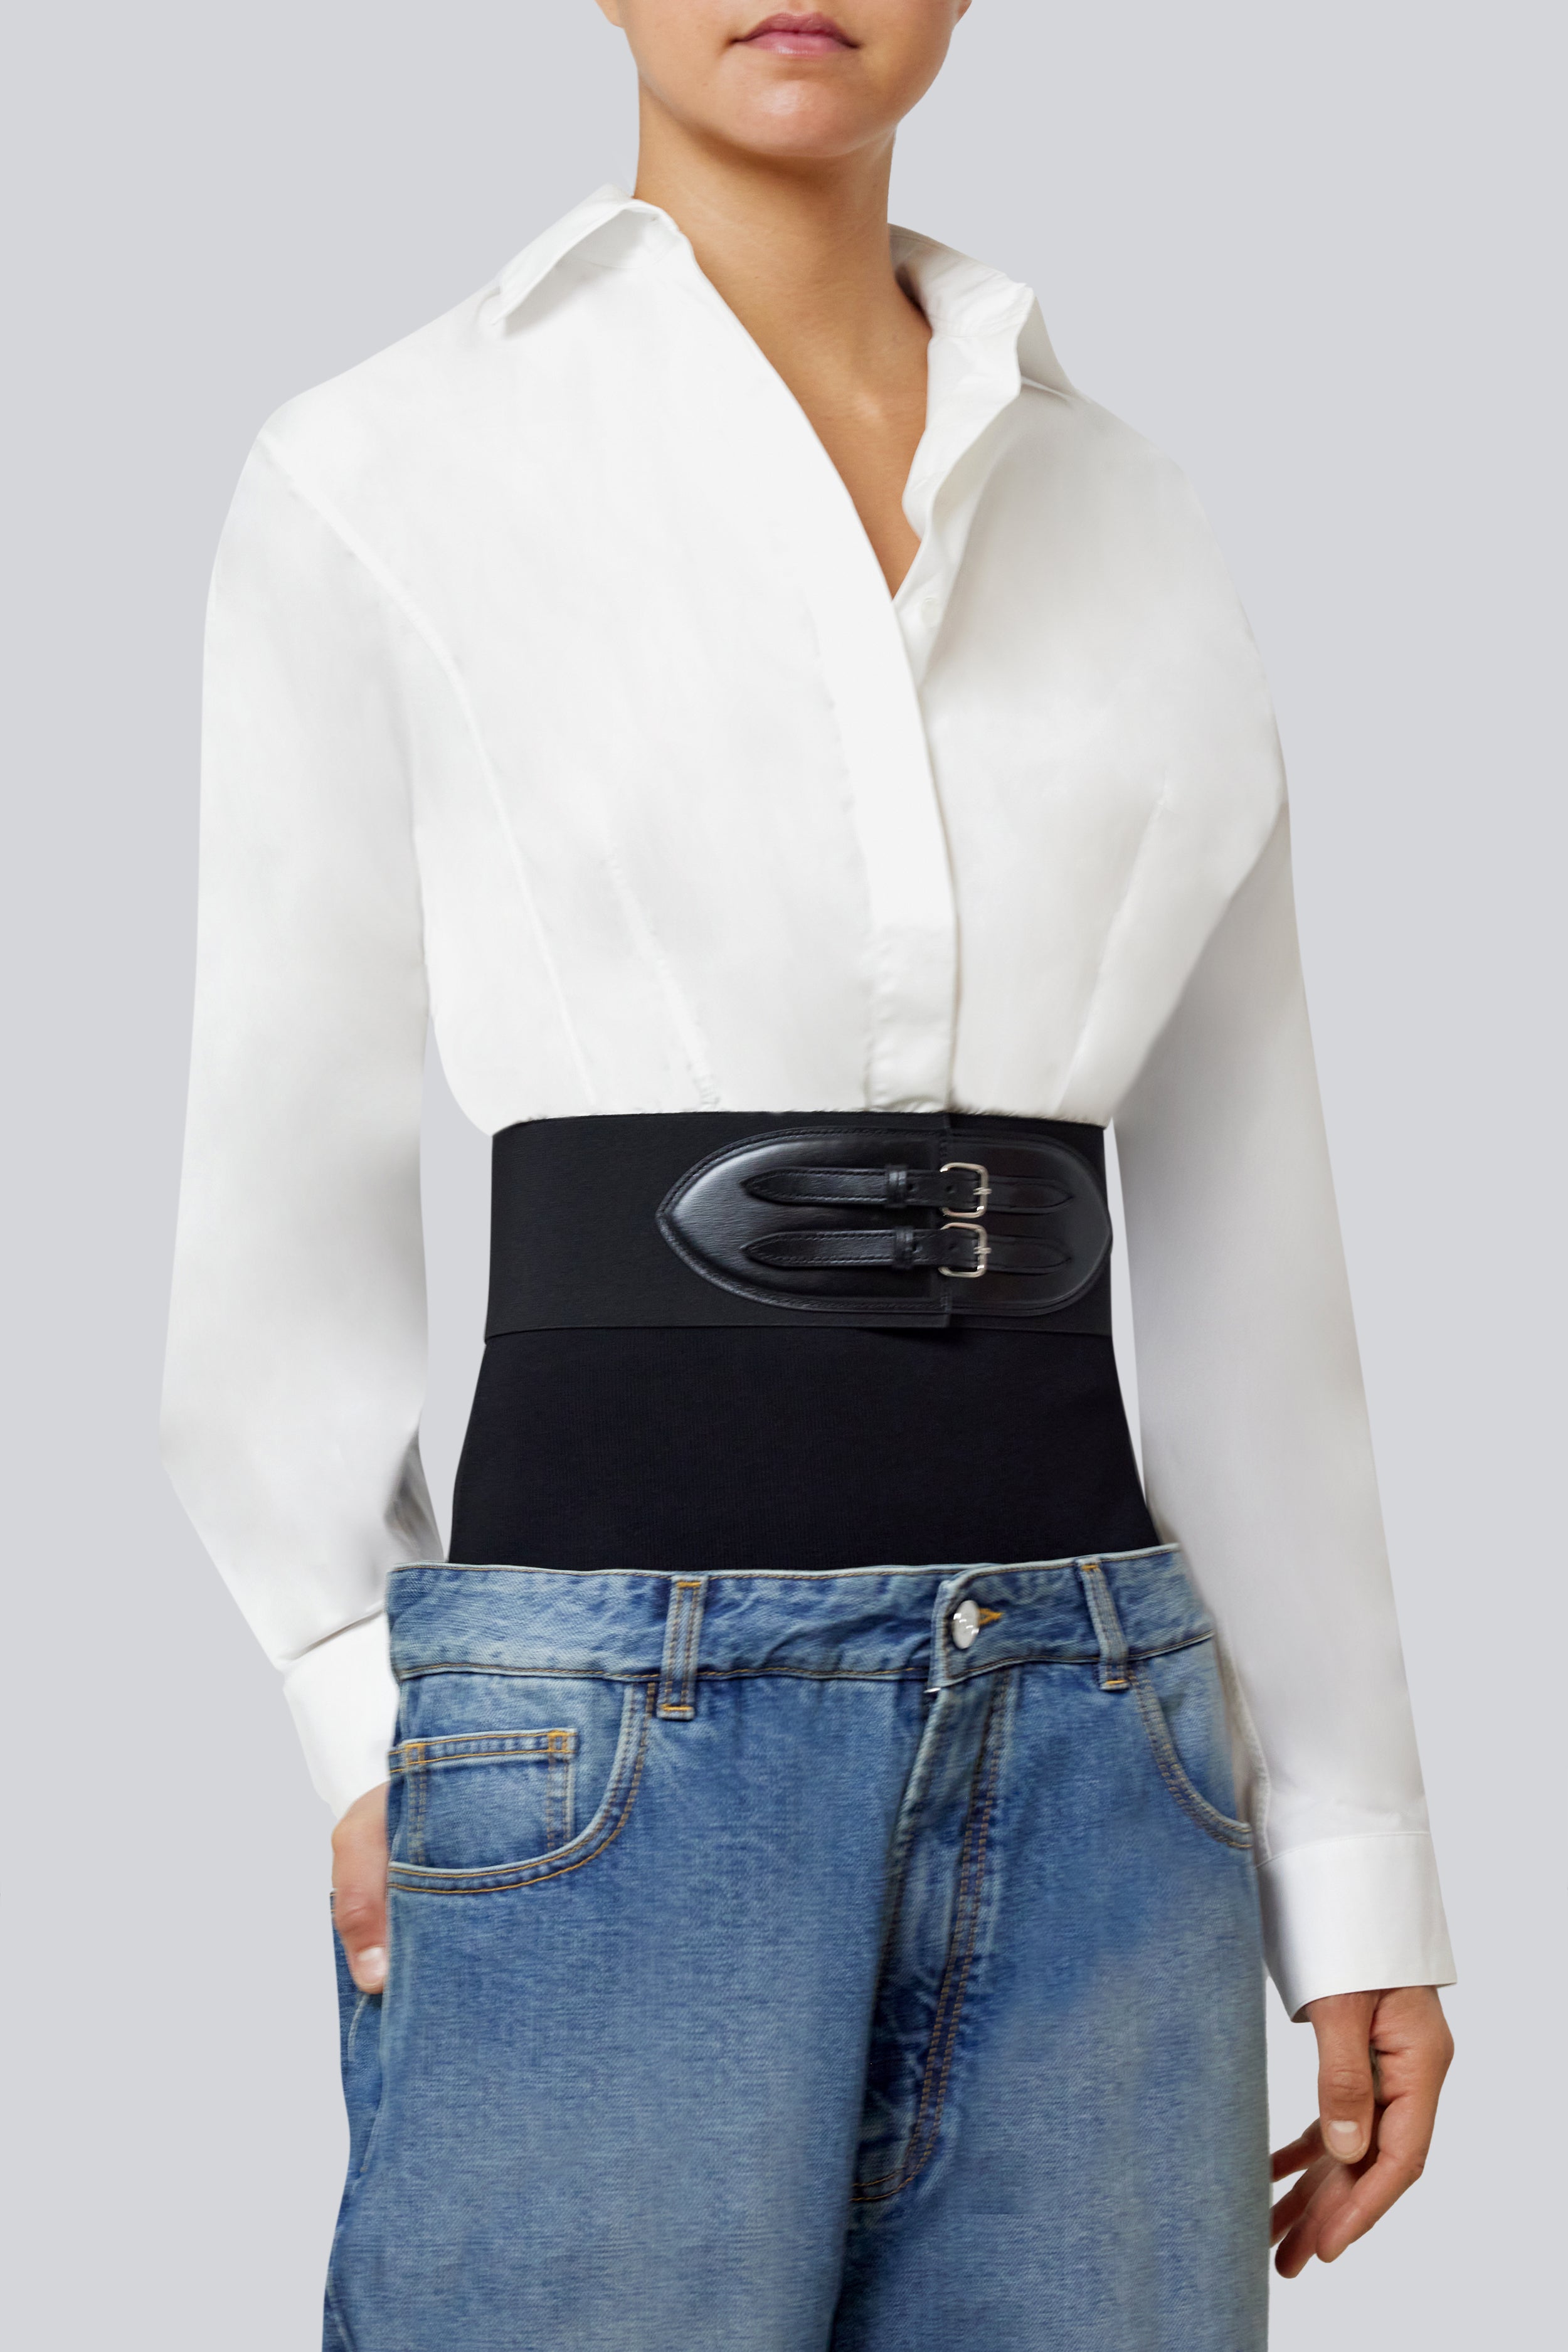 ALAIA RTW BELTED SHIRT | WHITE